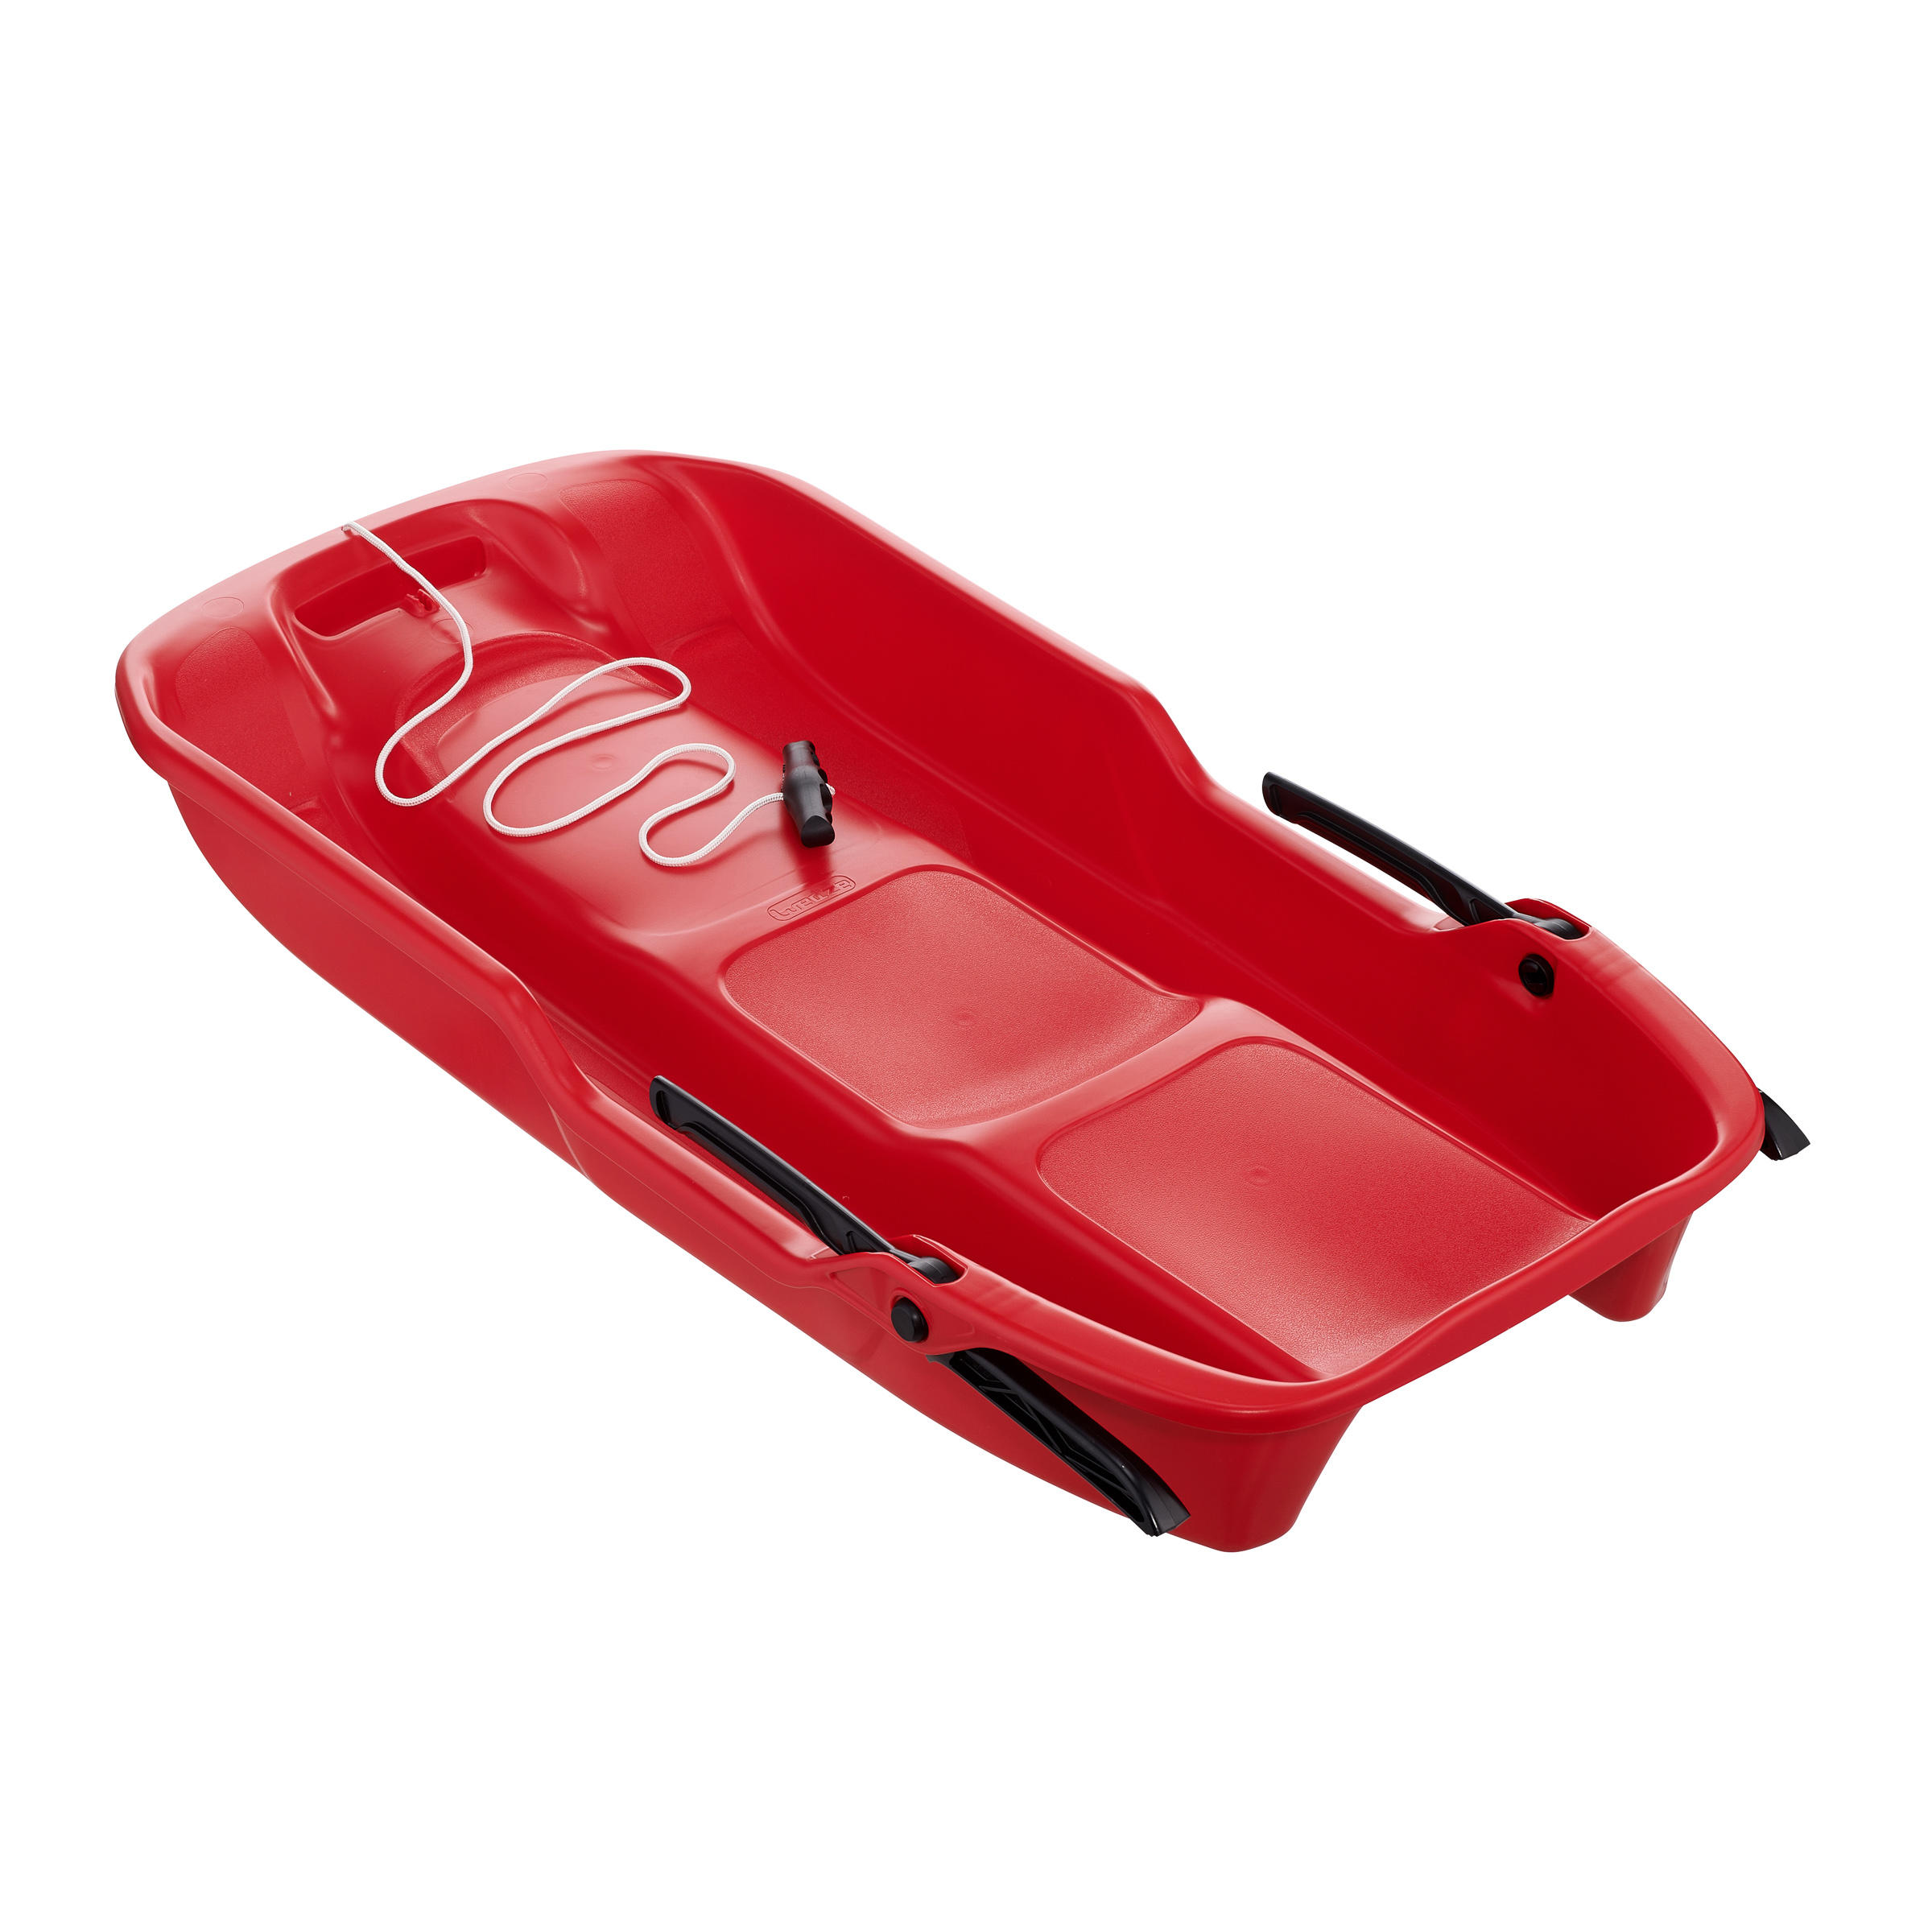 Sledges Adult Tray Sledge with Brakes 